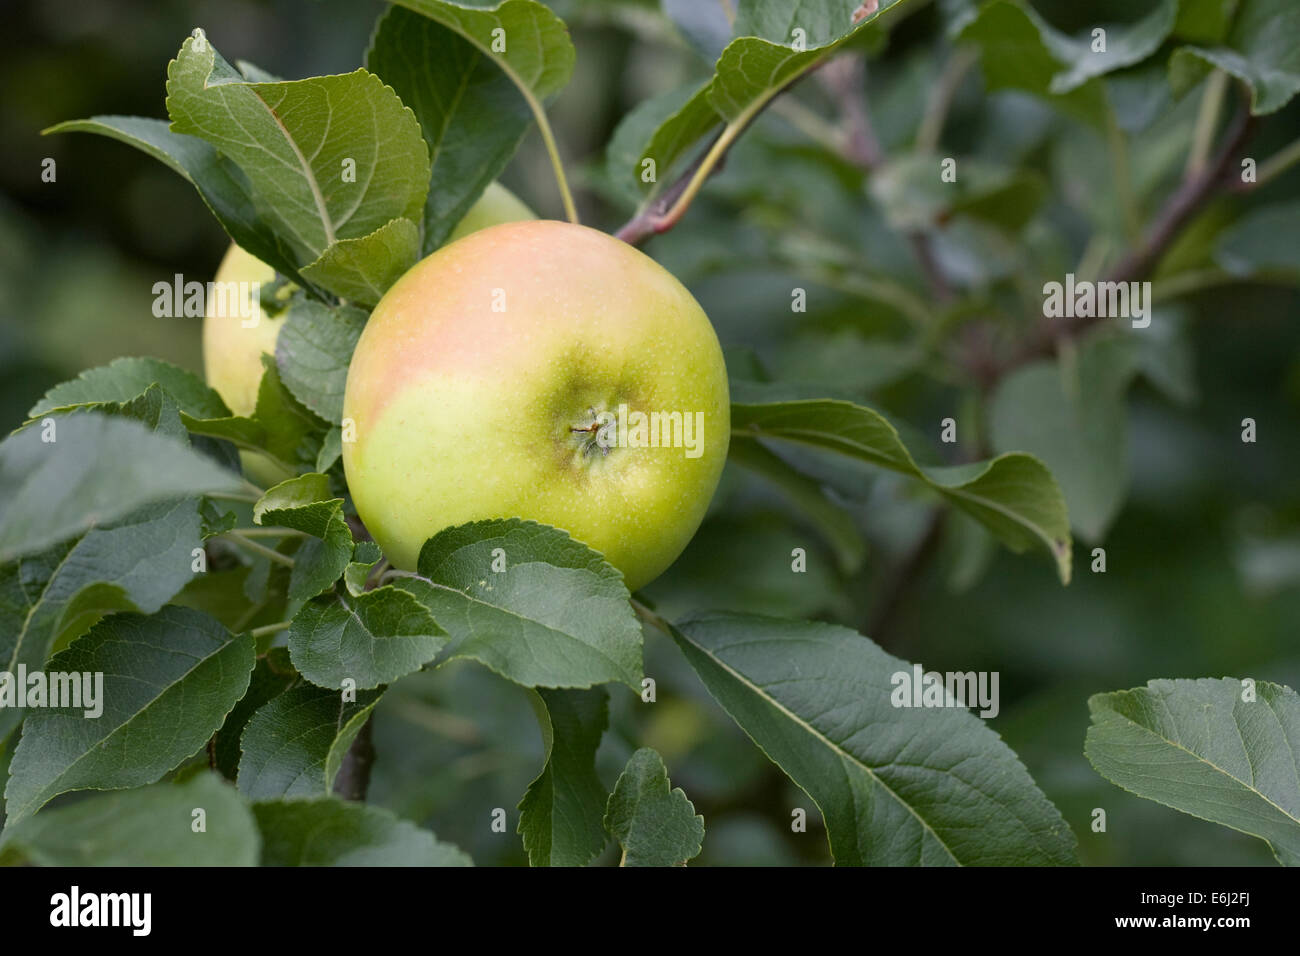 Malus domestica 'Limelight'. Apples growing in an English orchard. Stock Photo